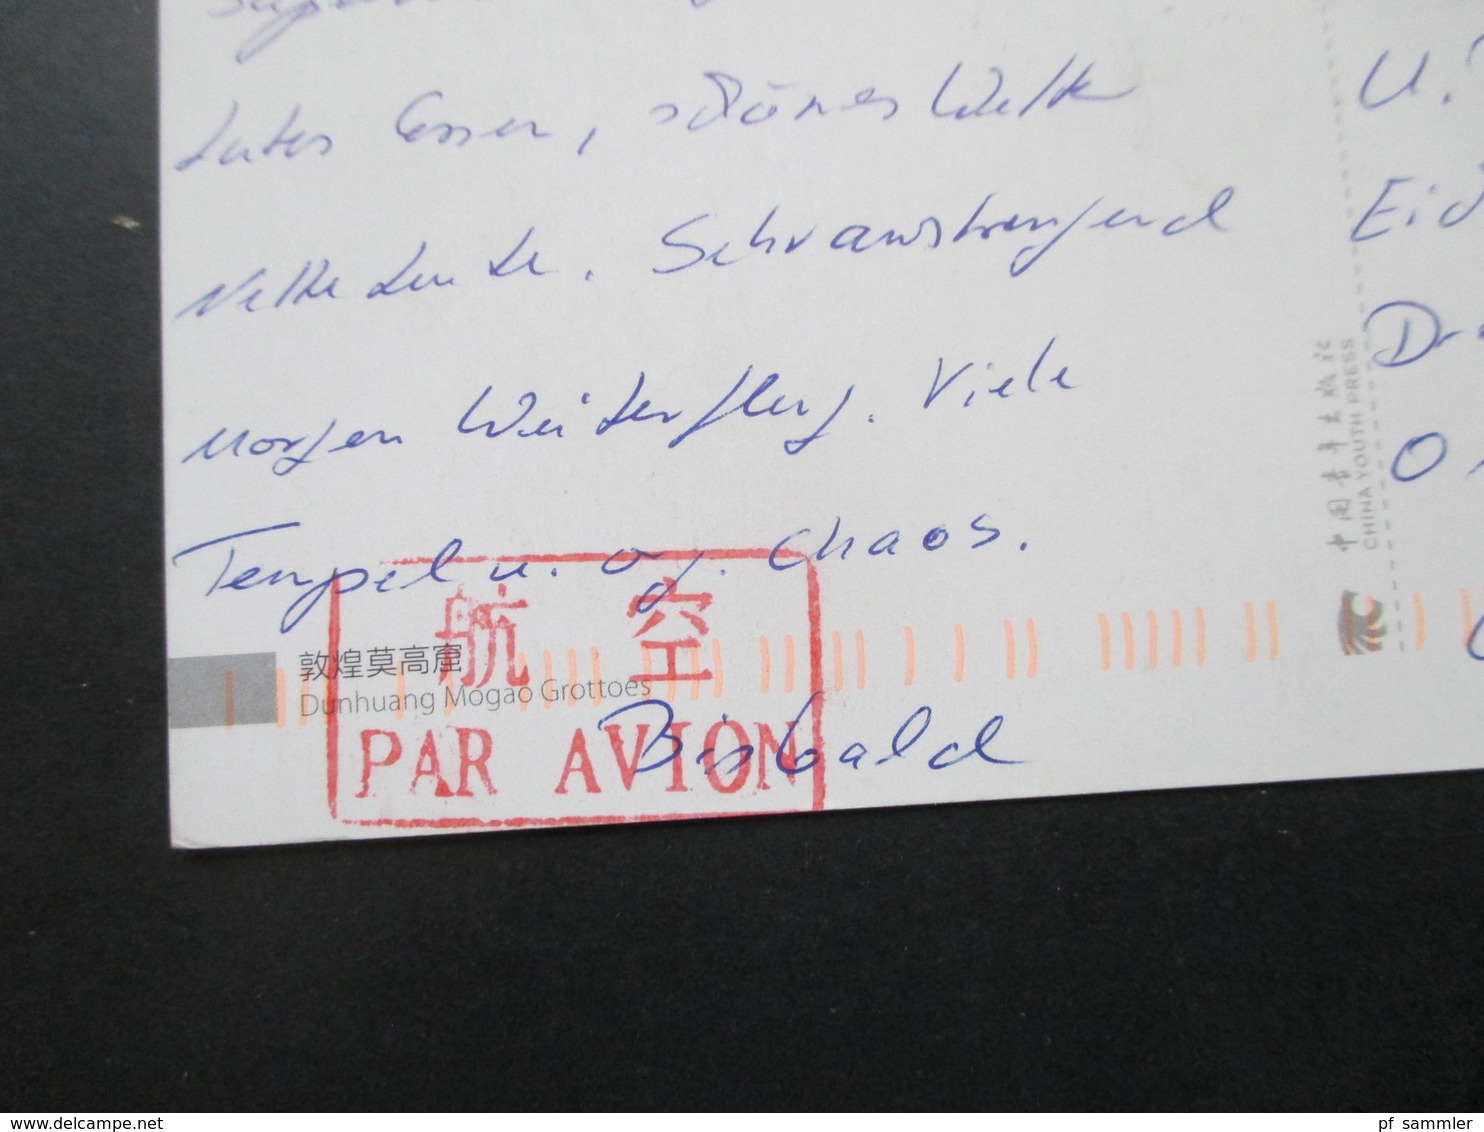 China 1998 / 2011 Postkarte / Luftpost Stempel In Rot! Dunhuang Magao Grottoes Mit 2 Marken Frankiert! - Lettres & Documents